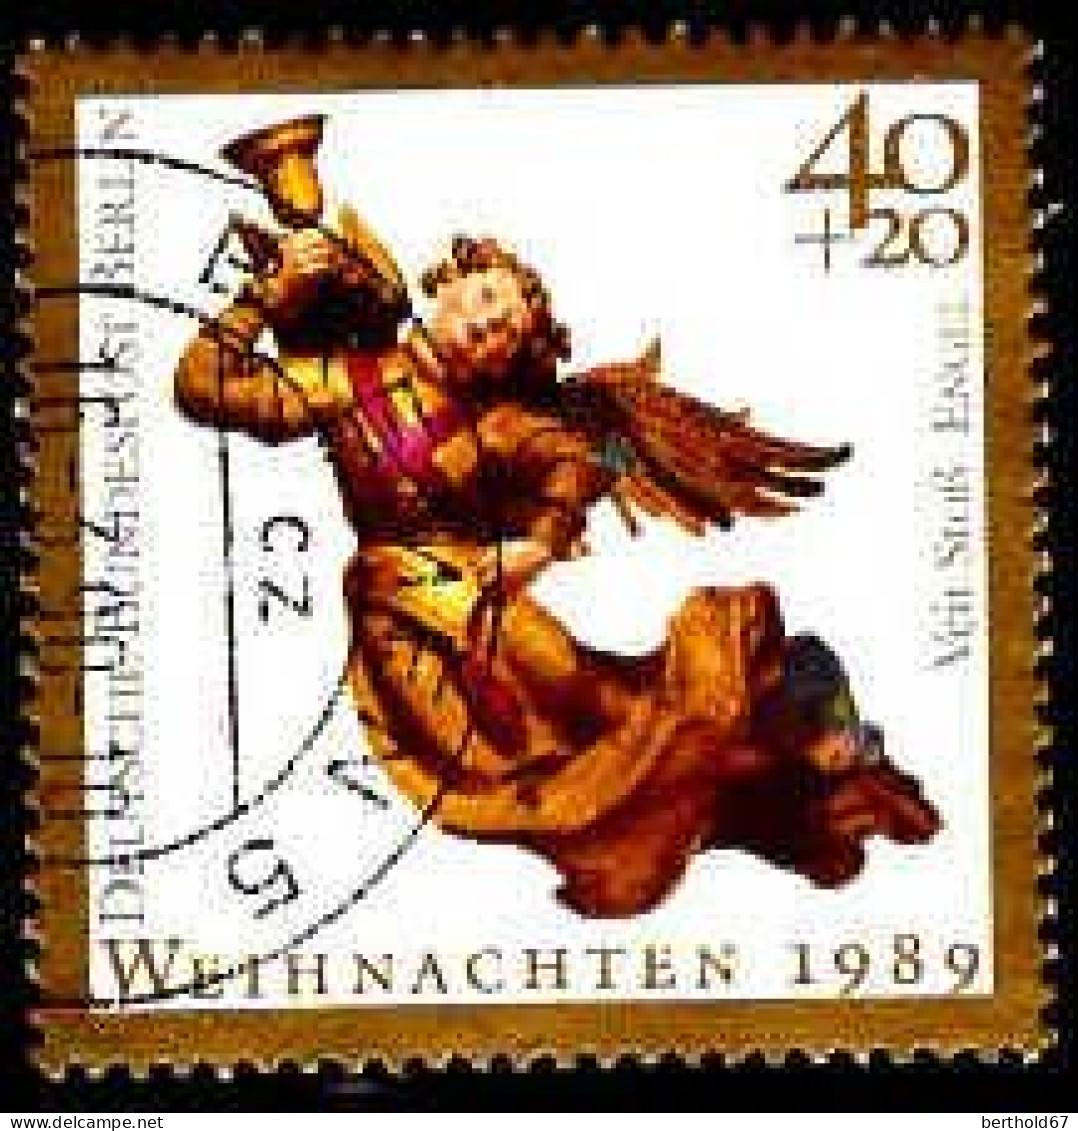 Berlin Poste Obl Yv:819/820 Noël Anges (TB Cachet Rond) - Used Stamps